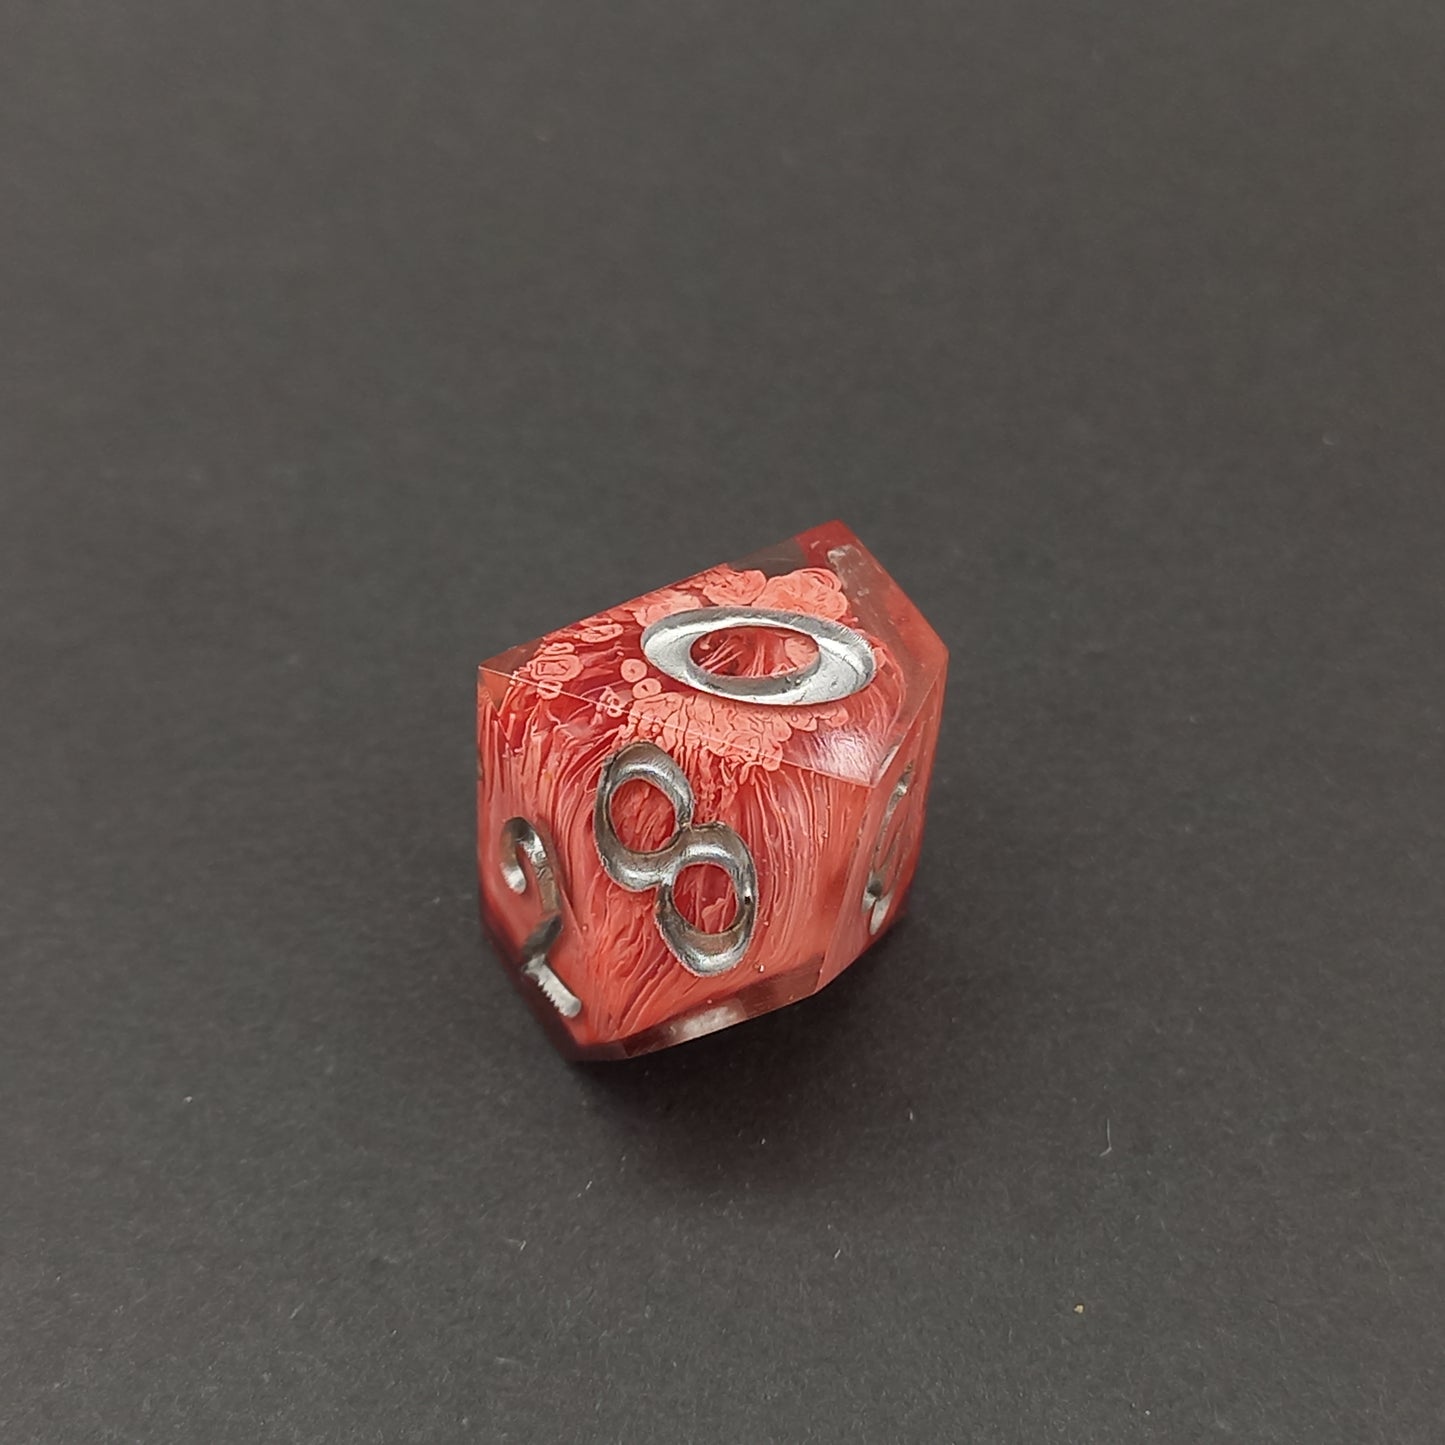 Bloodfire Ooze (Ooze Red Variant)